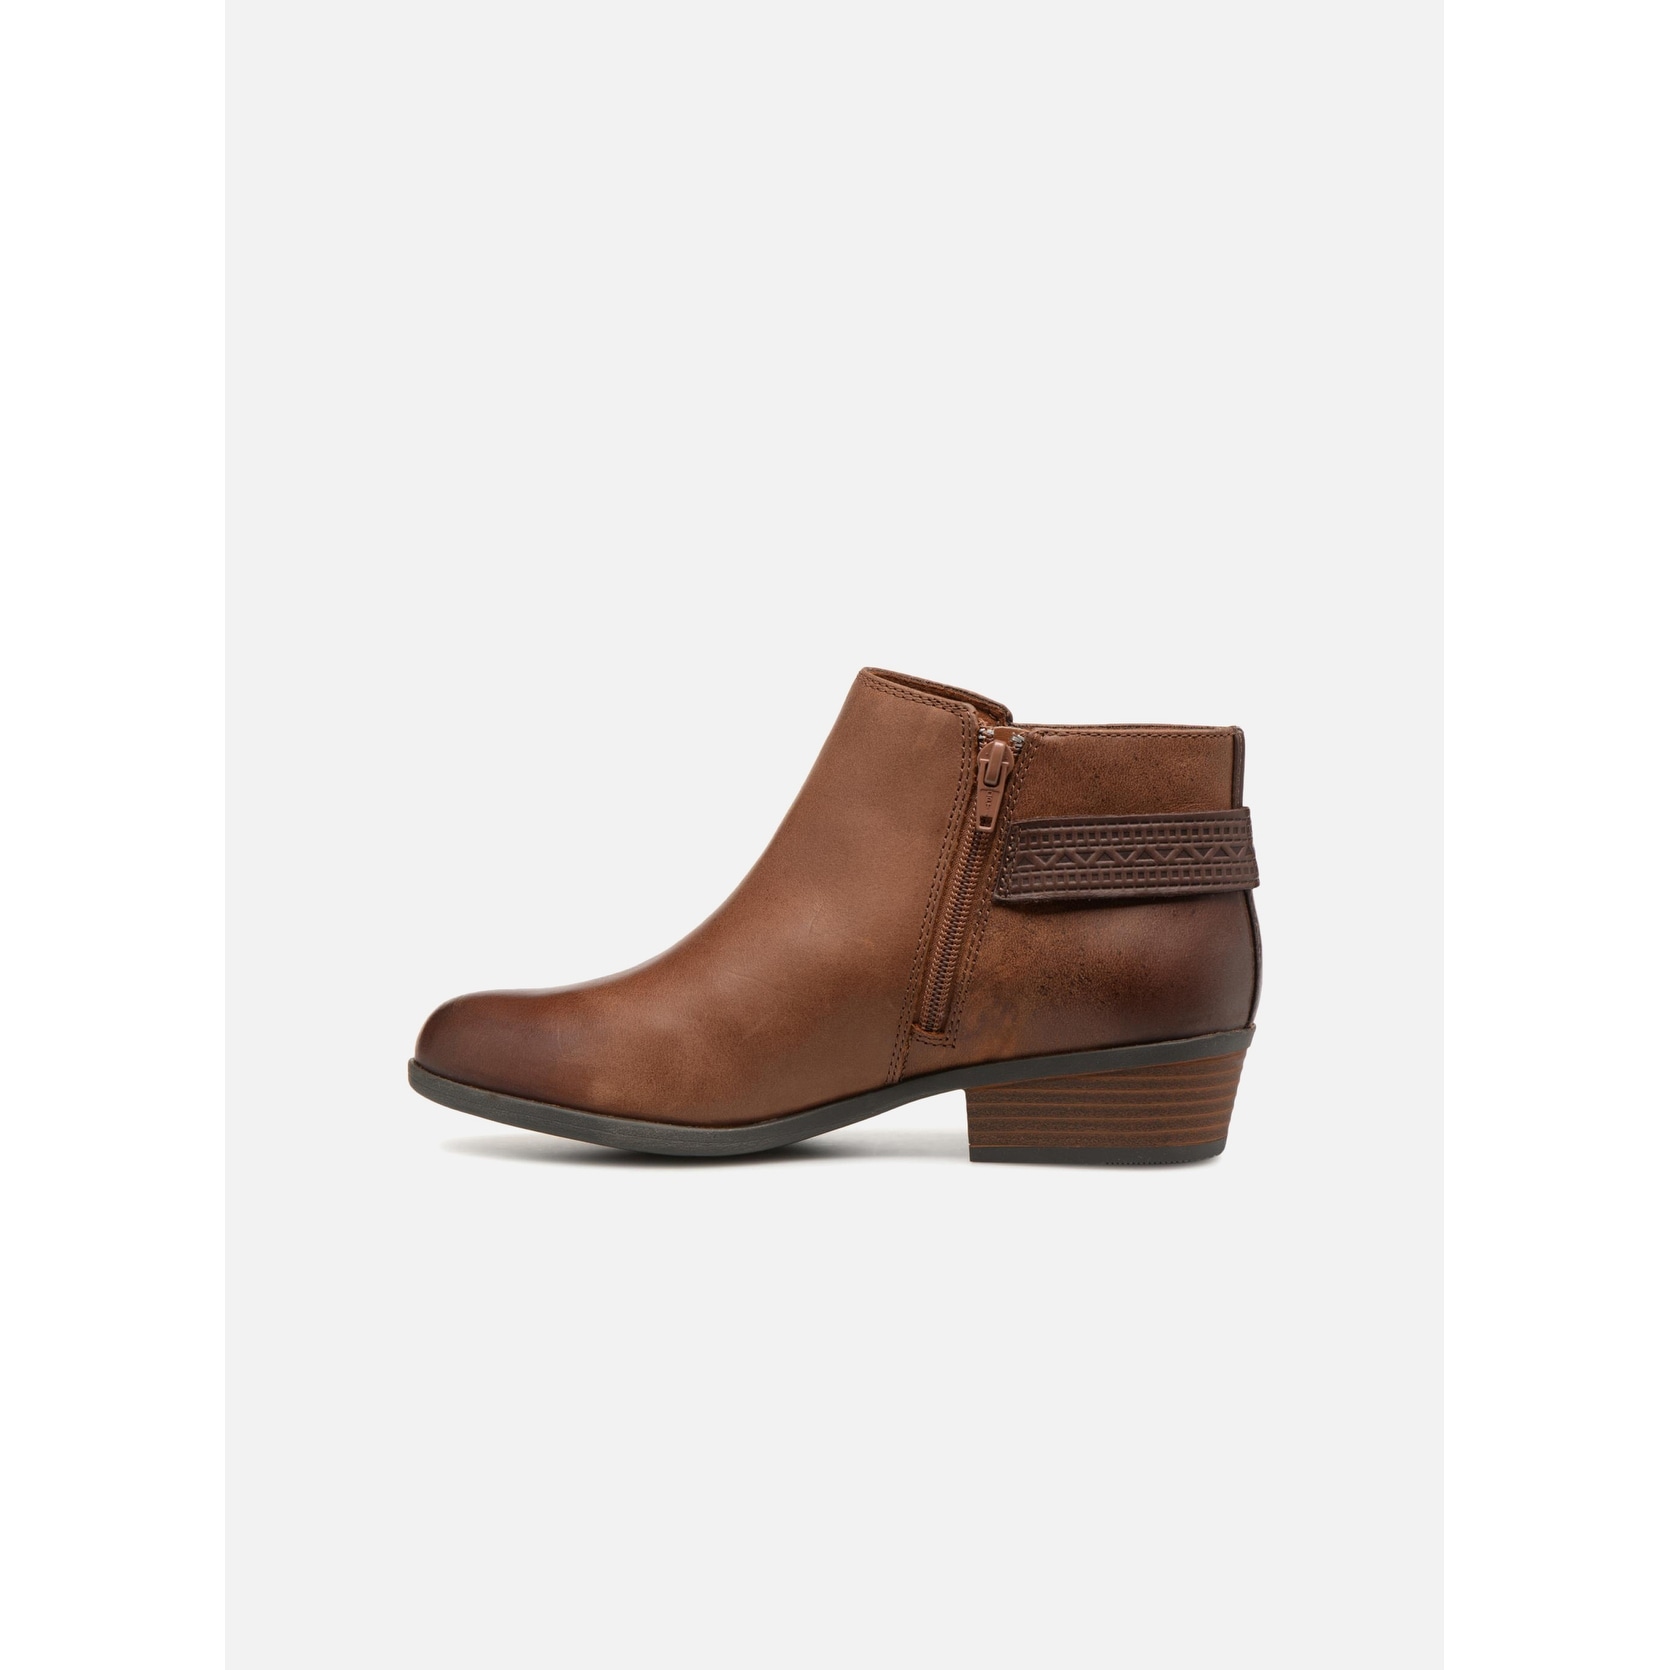 clarks addiy cora ankle boots